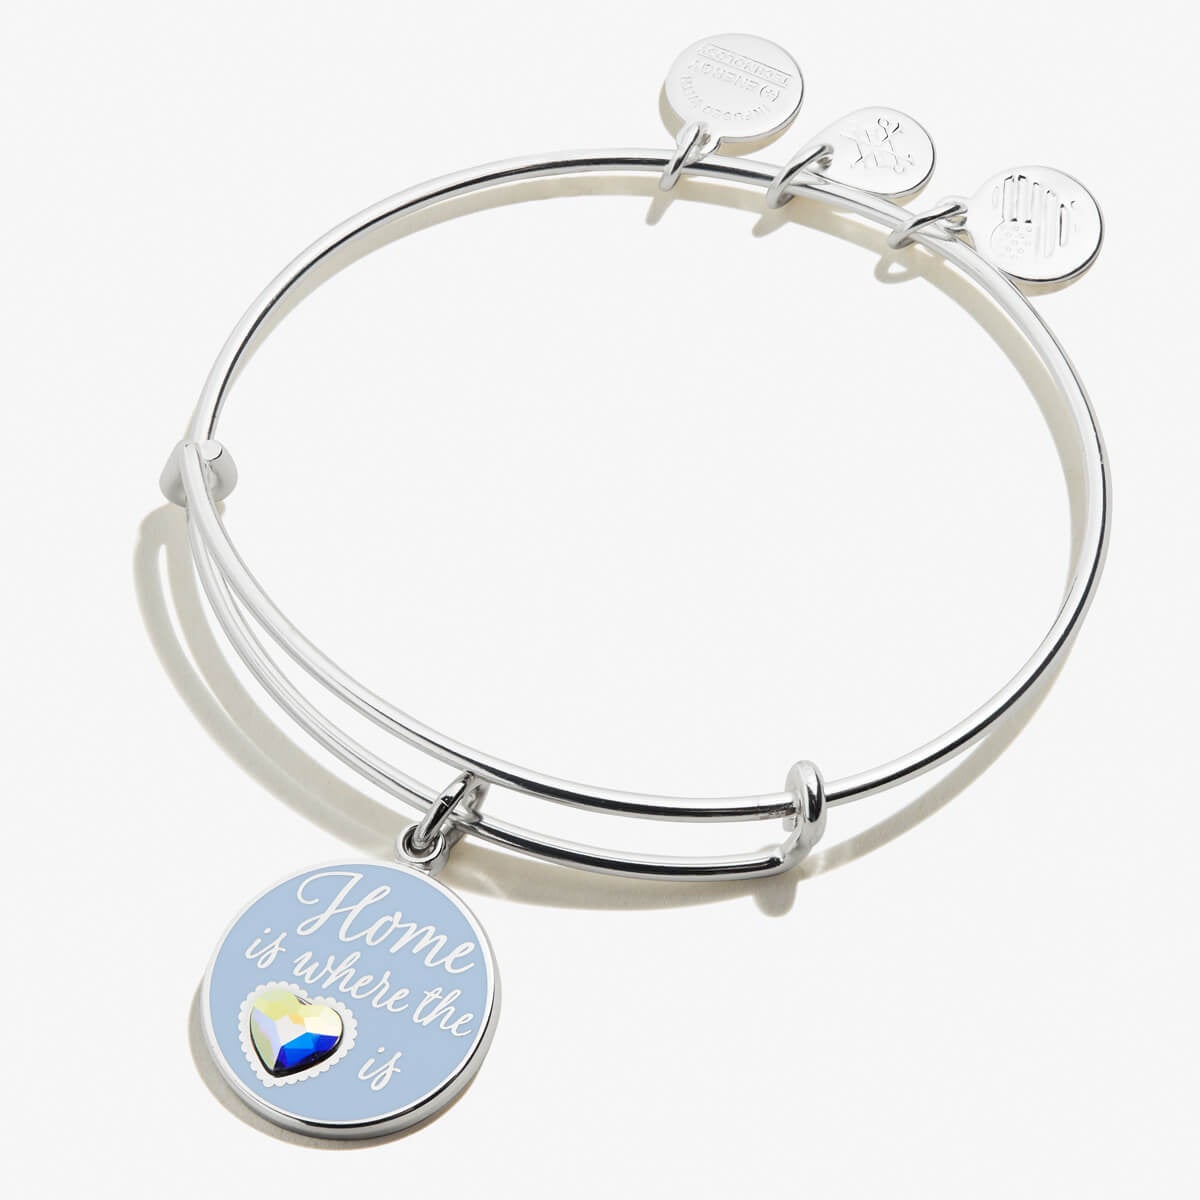 'Home is Where the Heart is' Charm Bangle